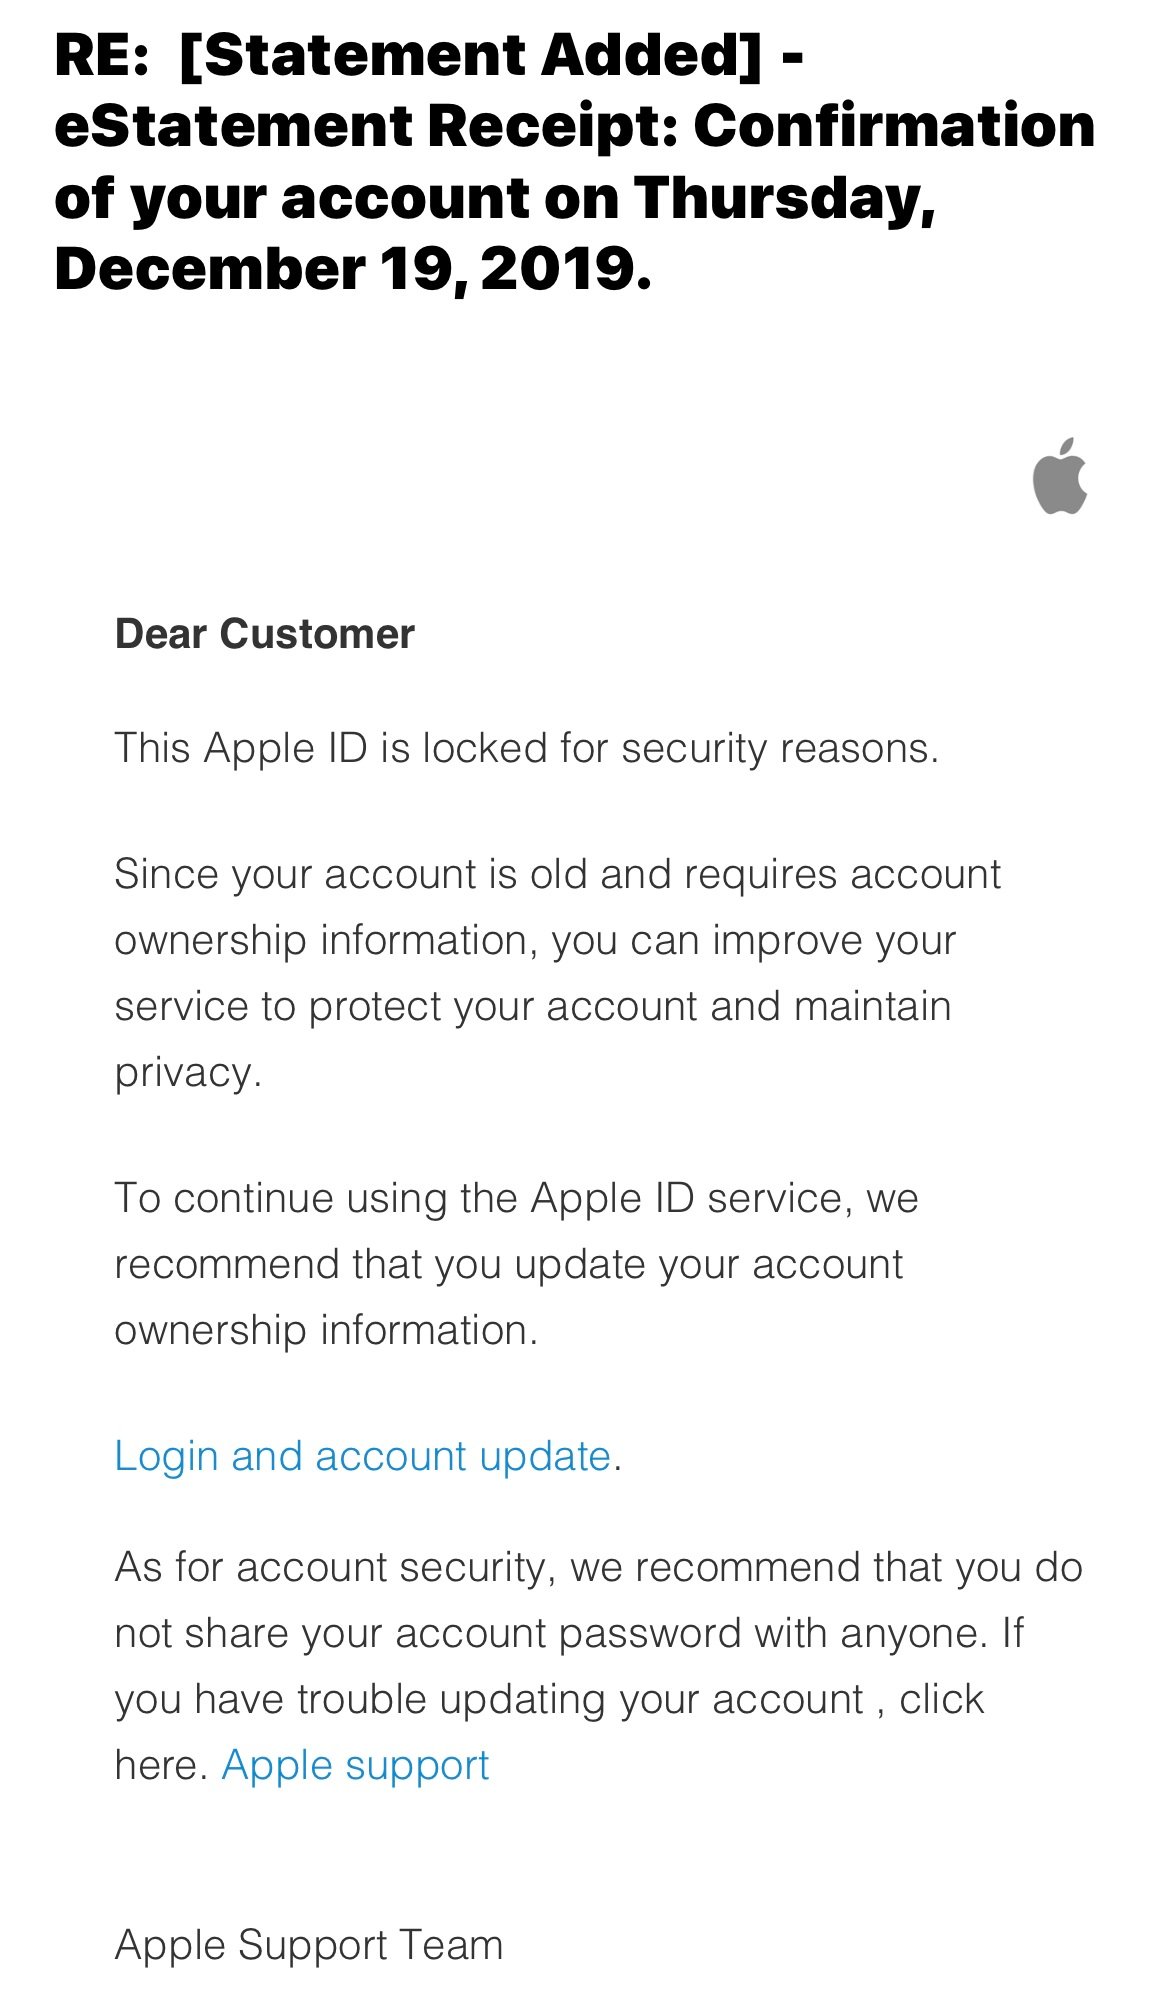 A Fake "Account Locked Email" From web.appsupport.com